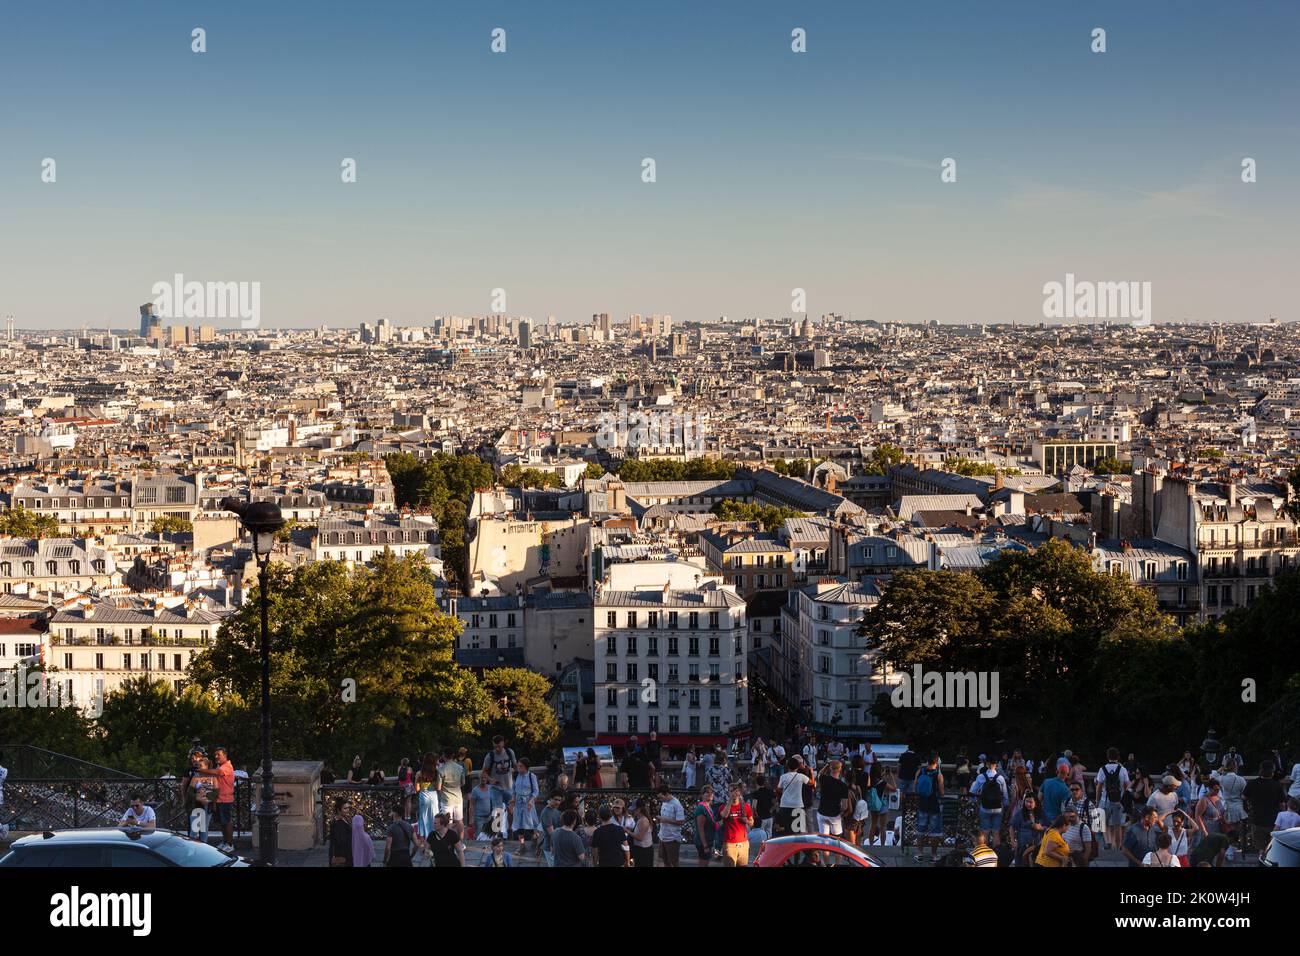 Paris, France - July, 15: Crowd at the staircase looking the city of Paris from its highest point in Montmartre on July 15, 2022 Stock Photo